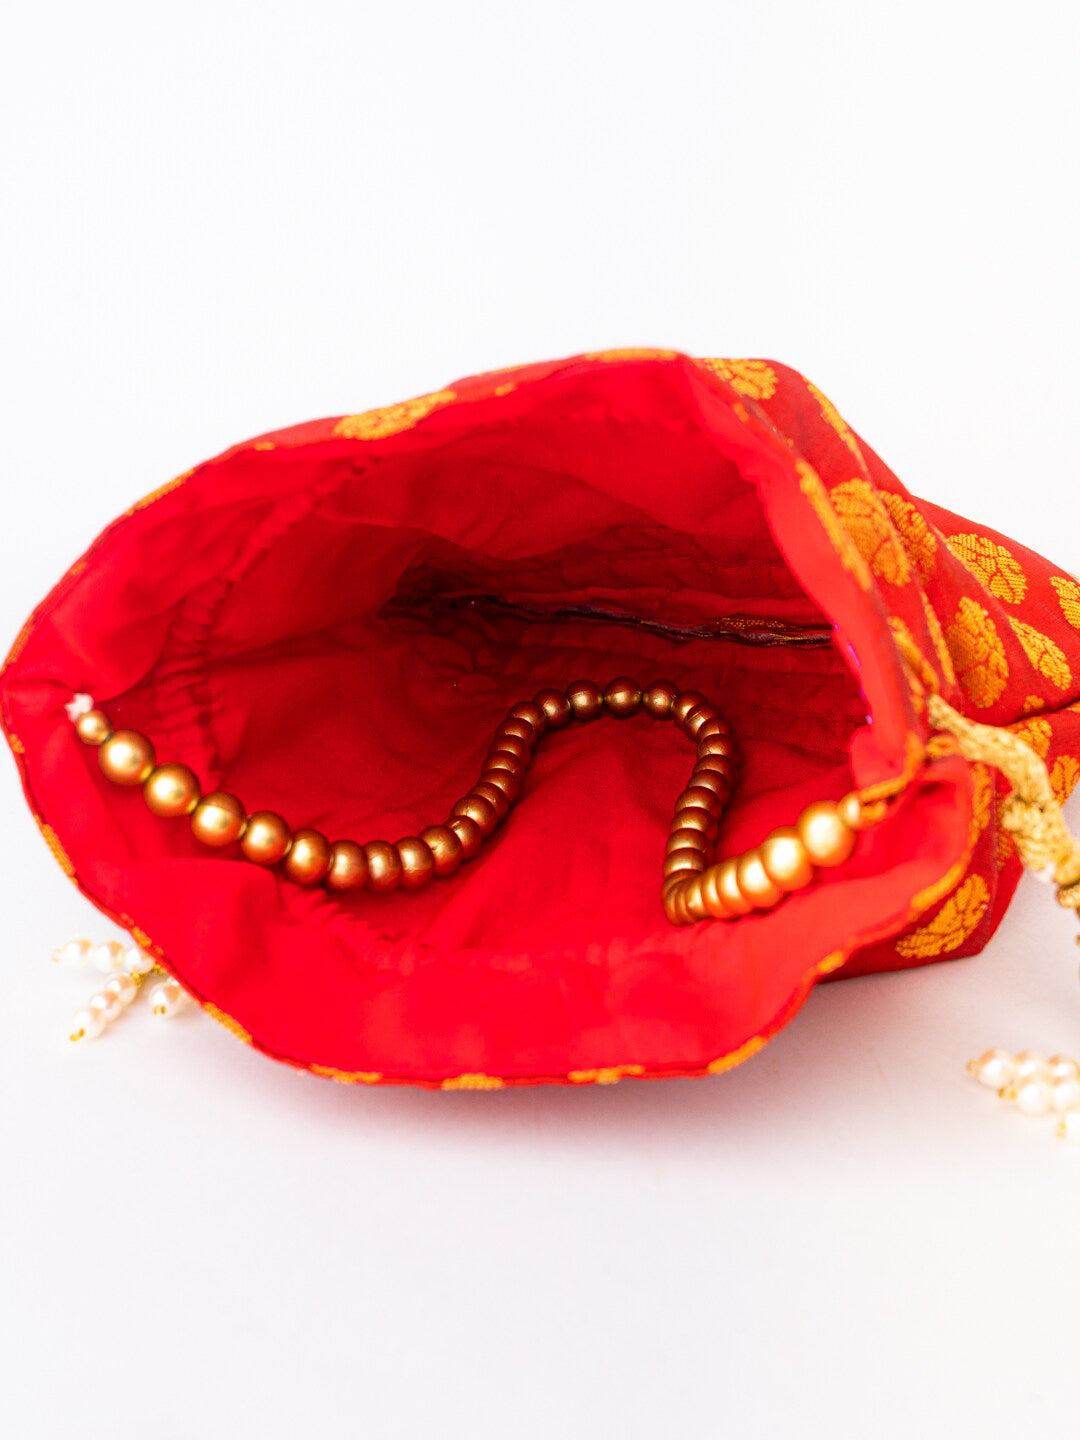 NR By Nidhi Rathi Red & Gold-Toned Embroidered Potli Clutch - Distacart